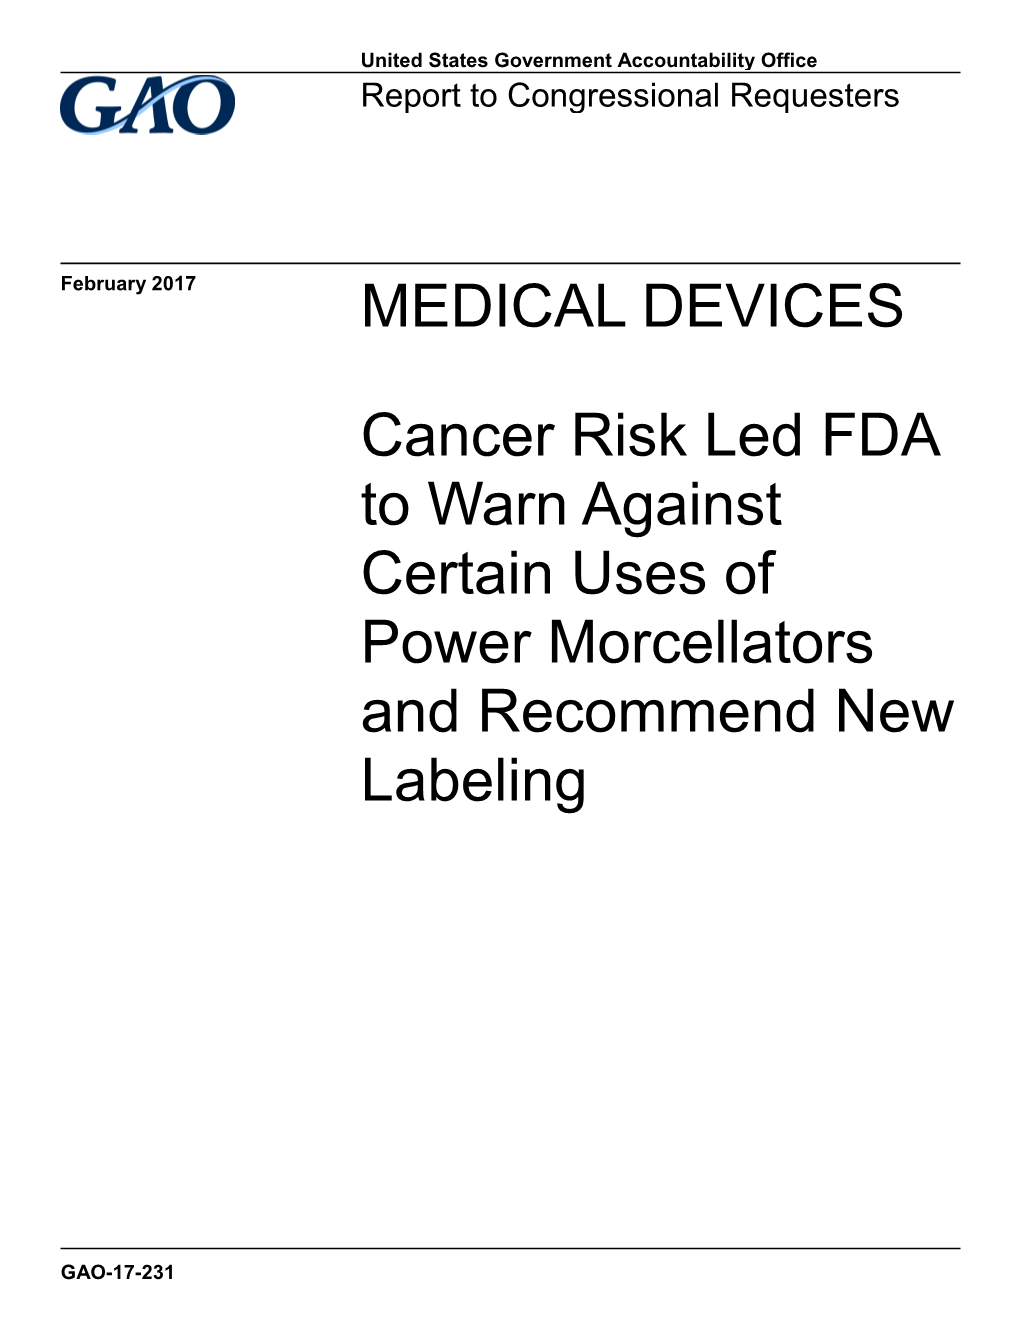 Cancer Risk Led FDA to Warn Against Certain Uses of Power Morcellators and Recommend New Labeling